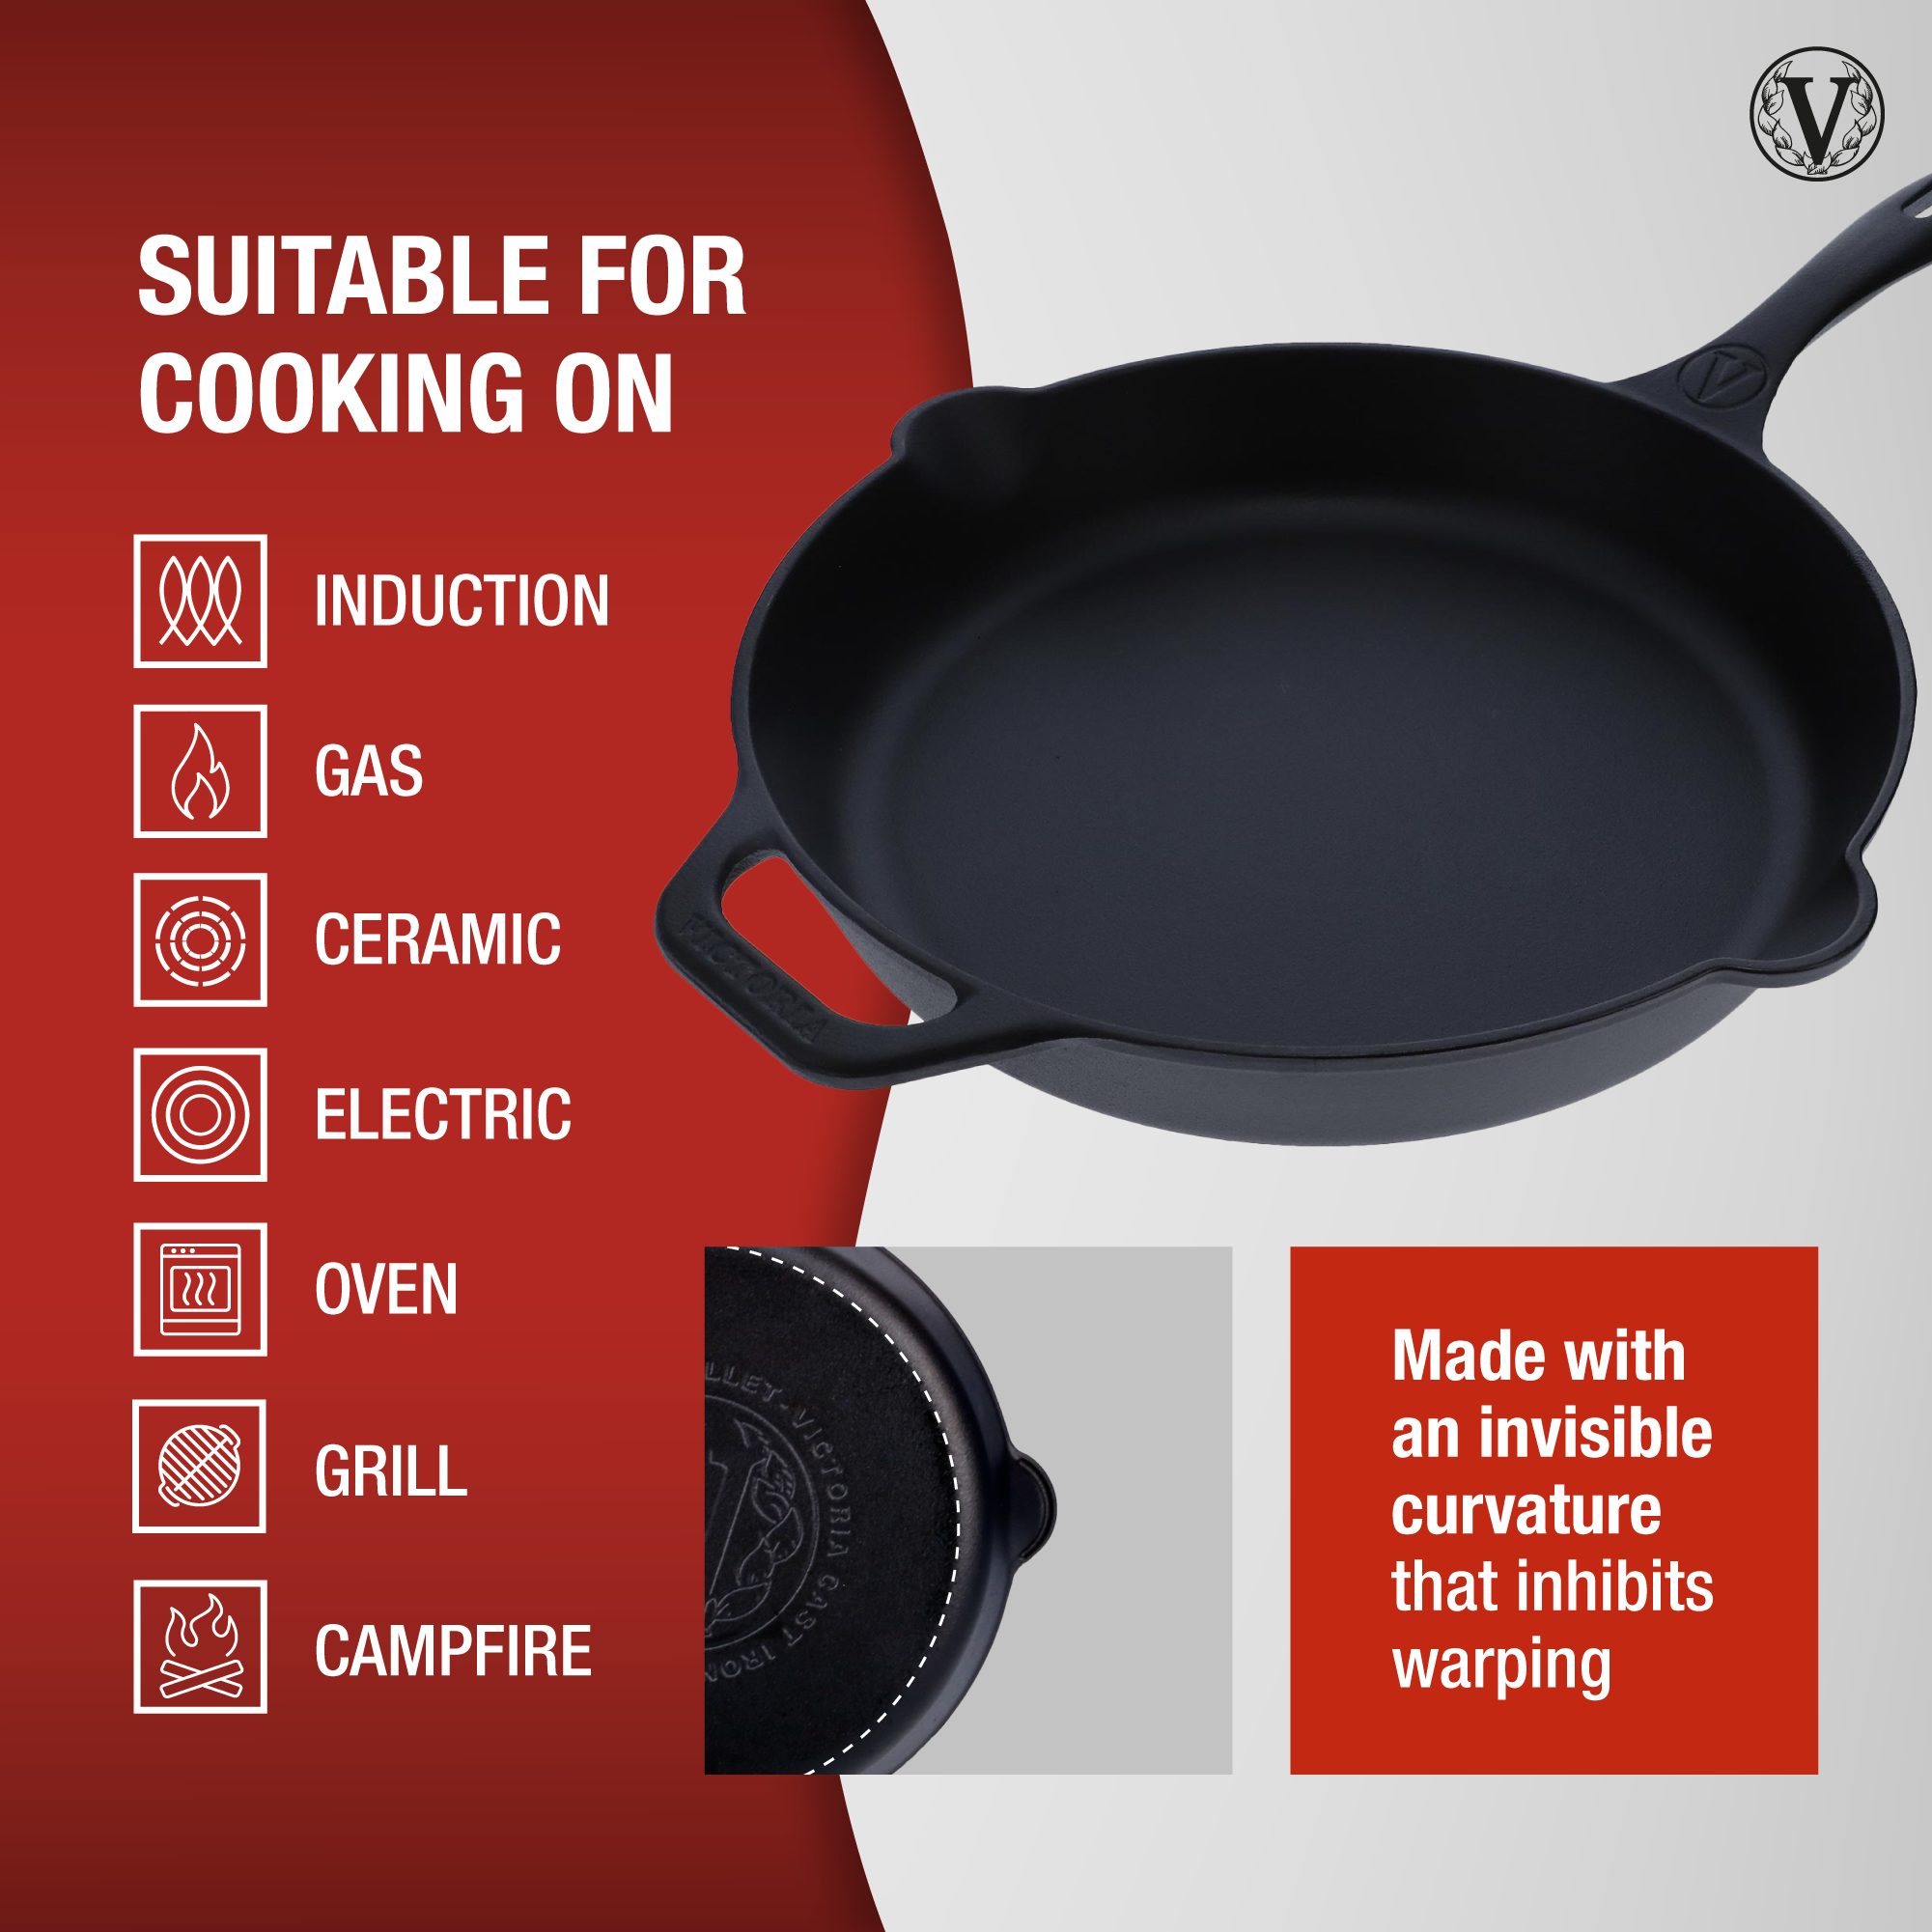 Victoria Cast Iron Skillet, Pre-Seasoned Cast-Iron Frying Pan with Long Handle, Made in Colombia, 12 Inch - image 4 of 5